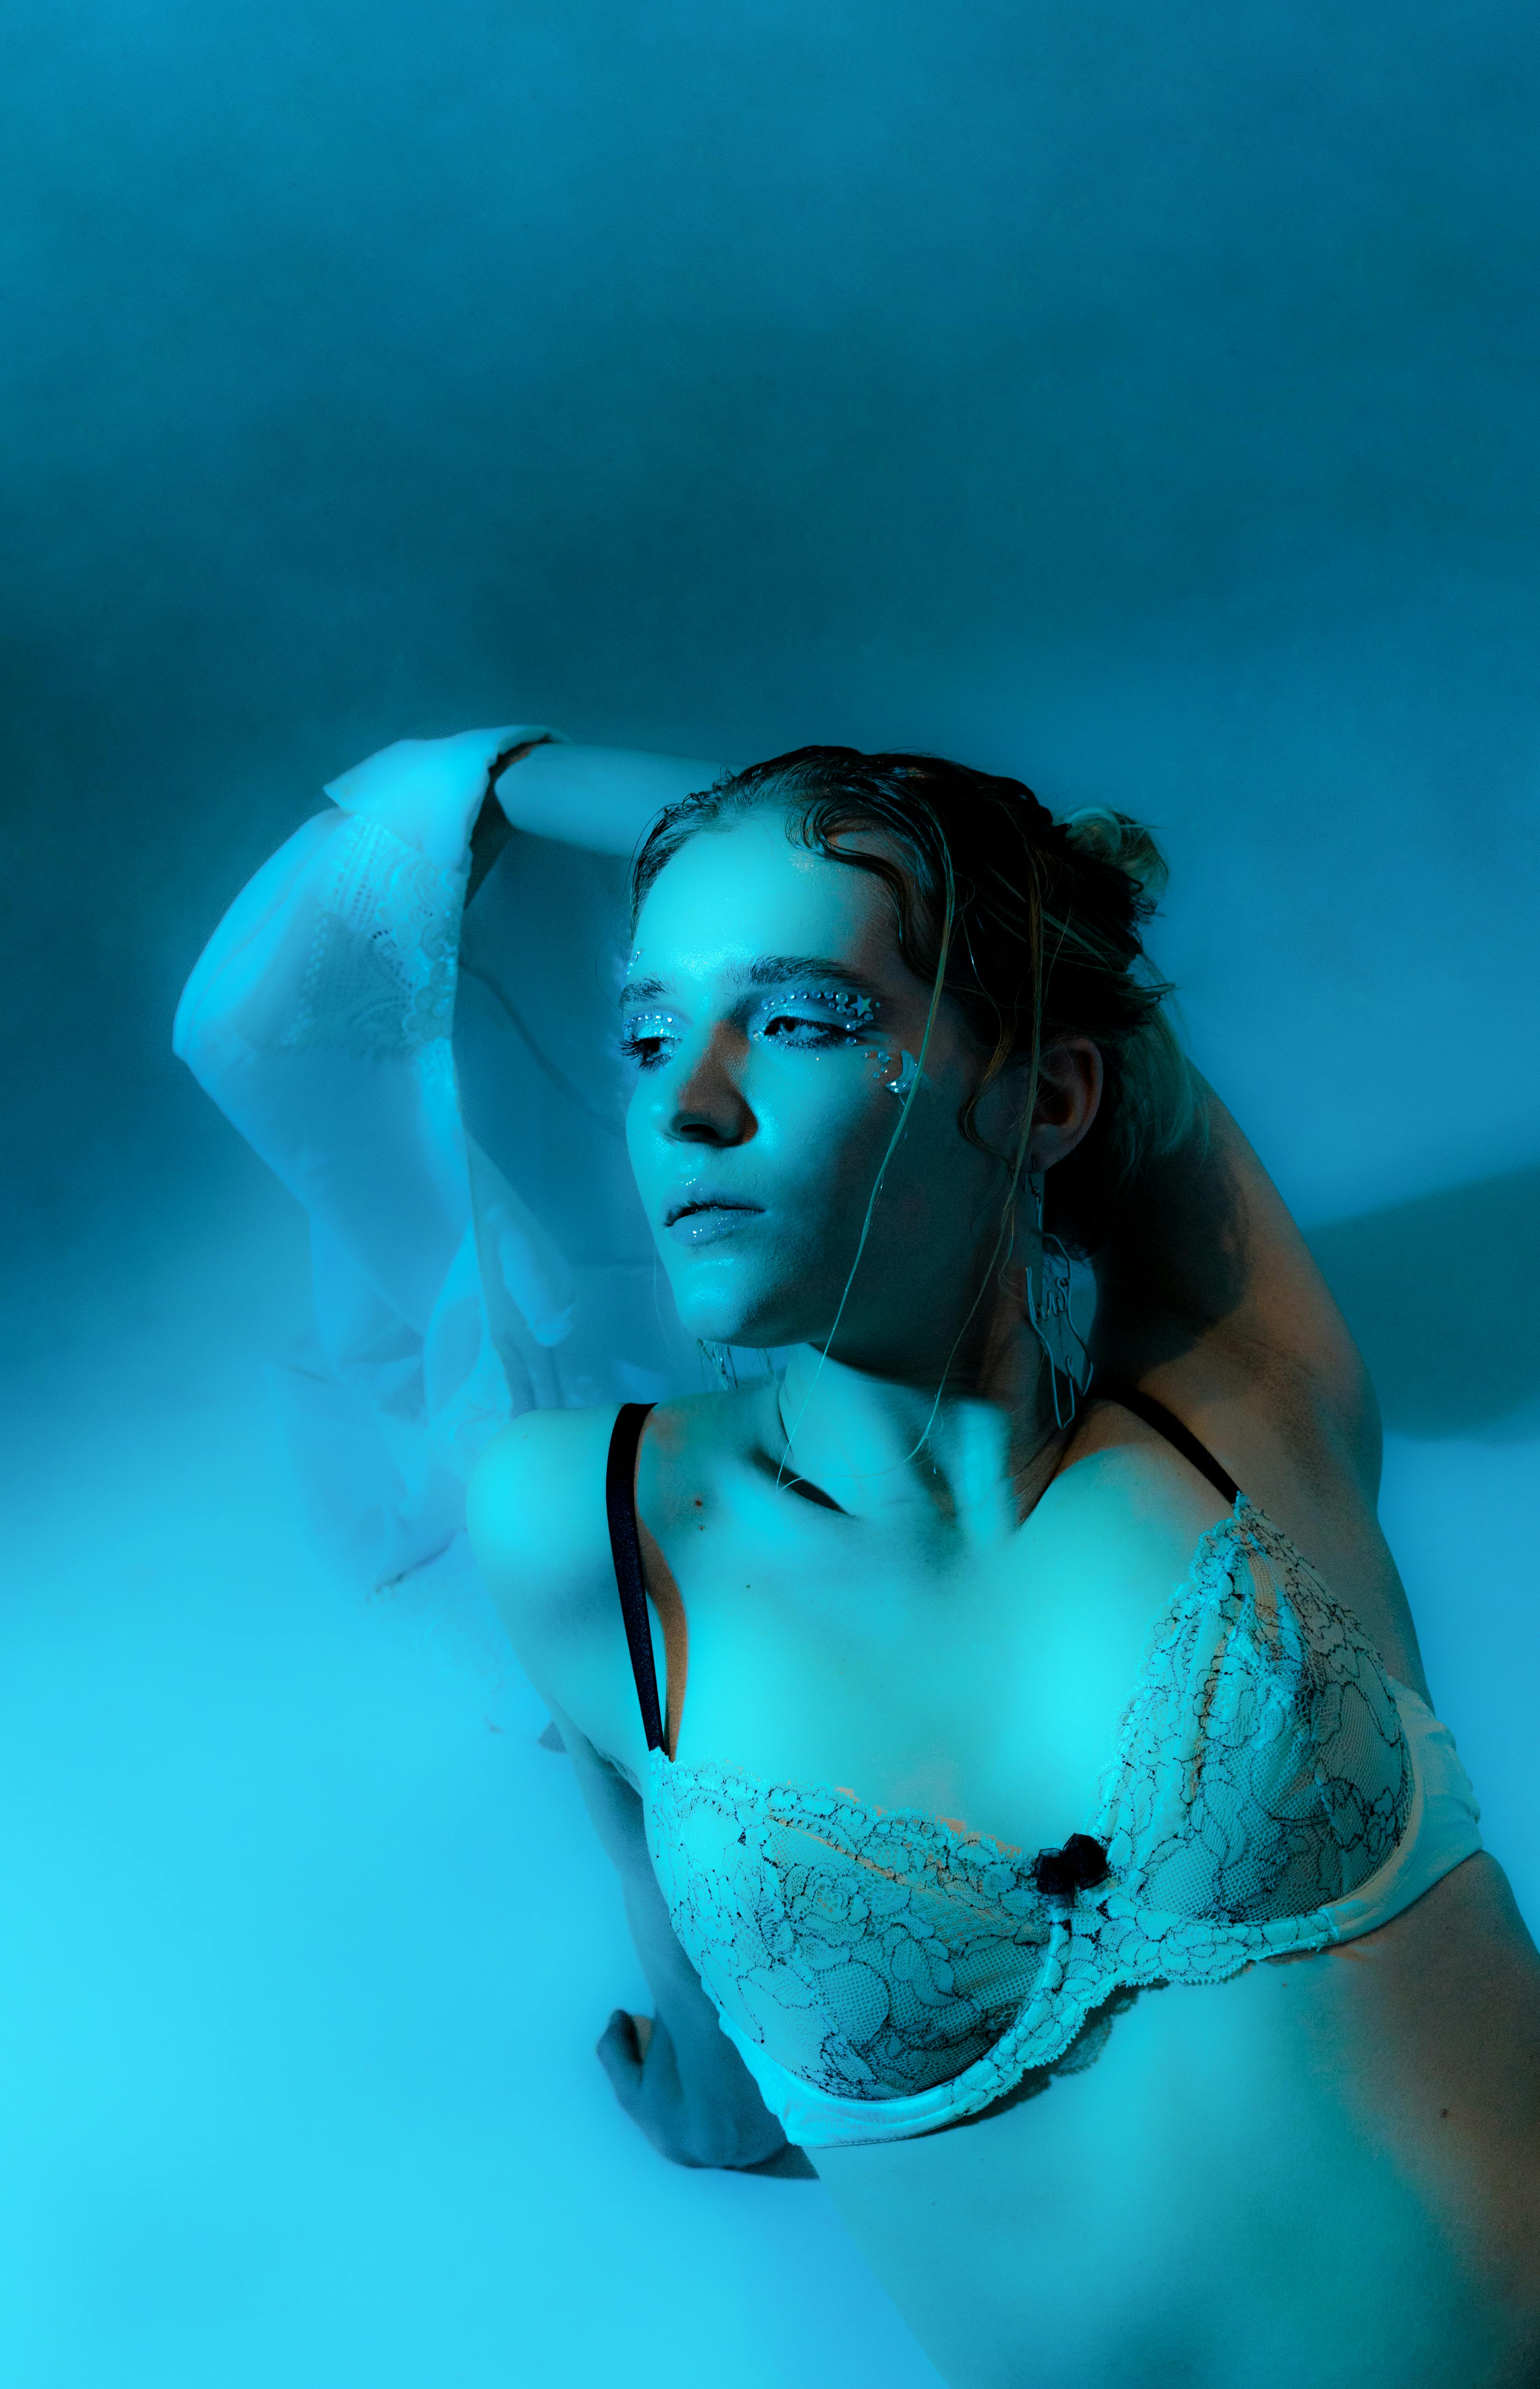 Gorgeous woman in bra sitting on floor in blue lights · Free Stock Photo